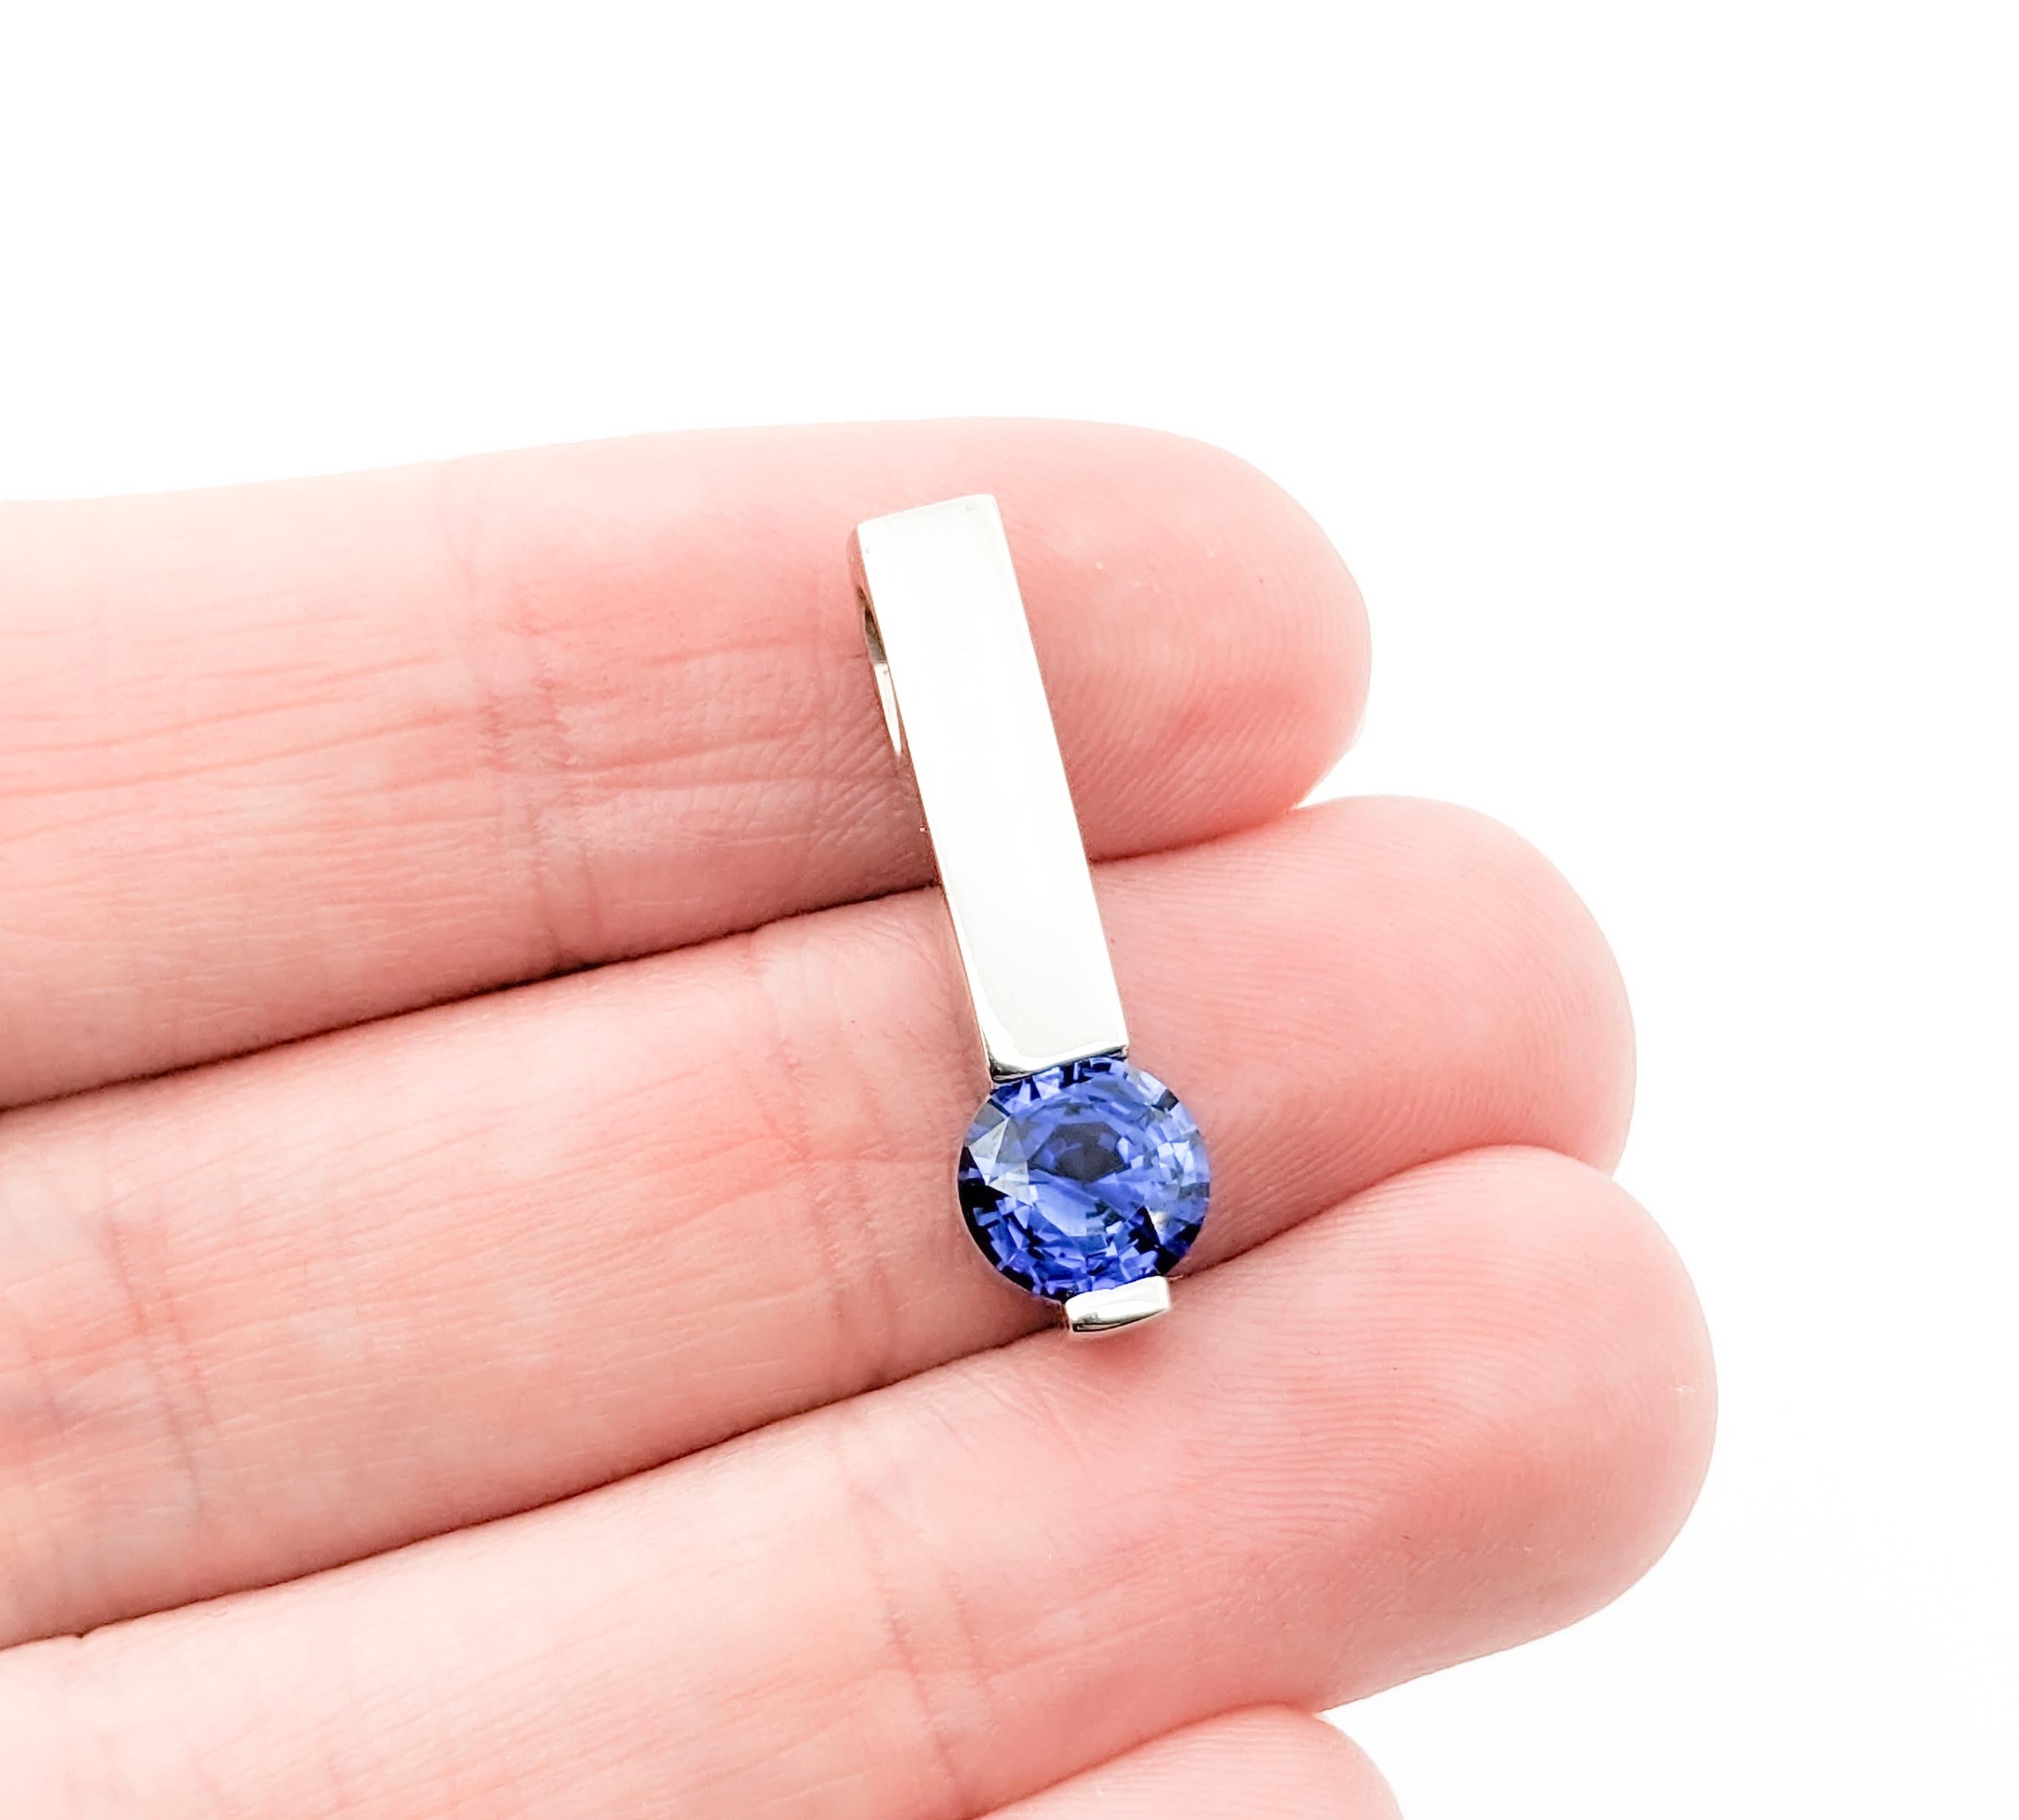 1.60ct Blue Sapphire Pendant In White Gold


This exquisite pendant, fashioned in 14kt white gold, features a bar style that is elegantly simple and timeless. It showcases a stunning 1.60ct sapphire with a captivating blue hue, set in a sleek,